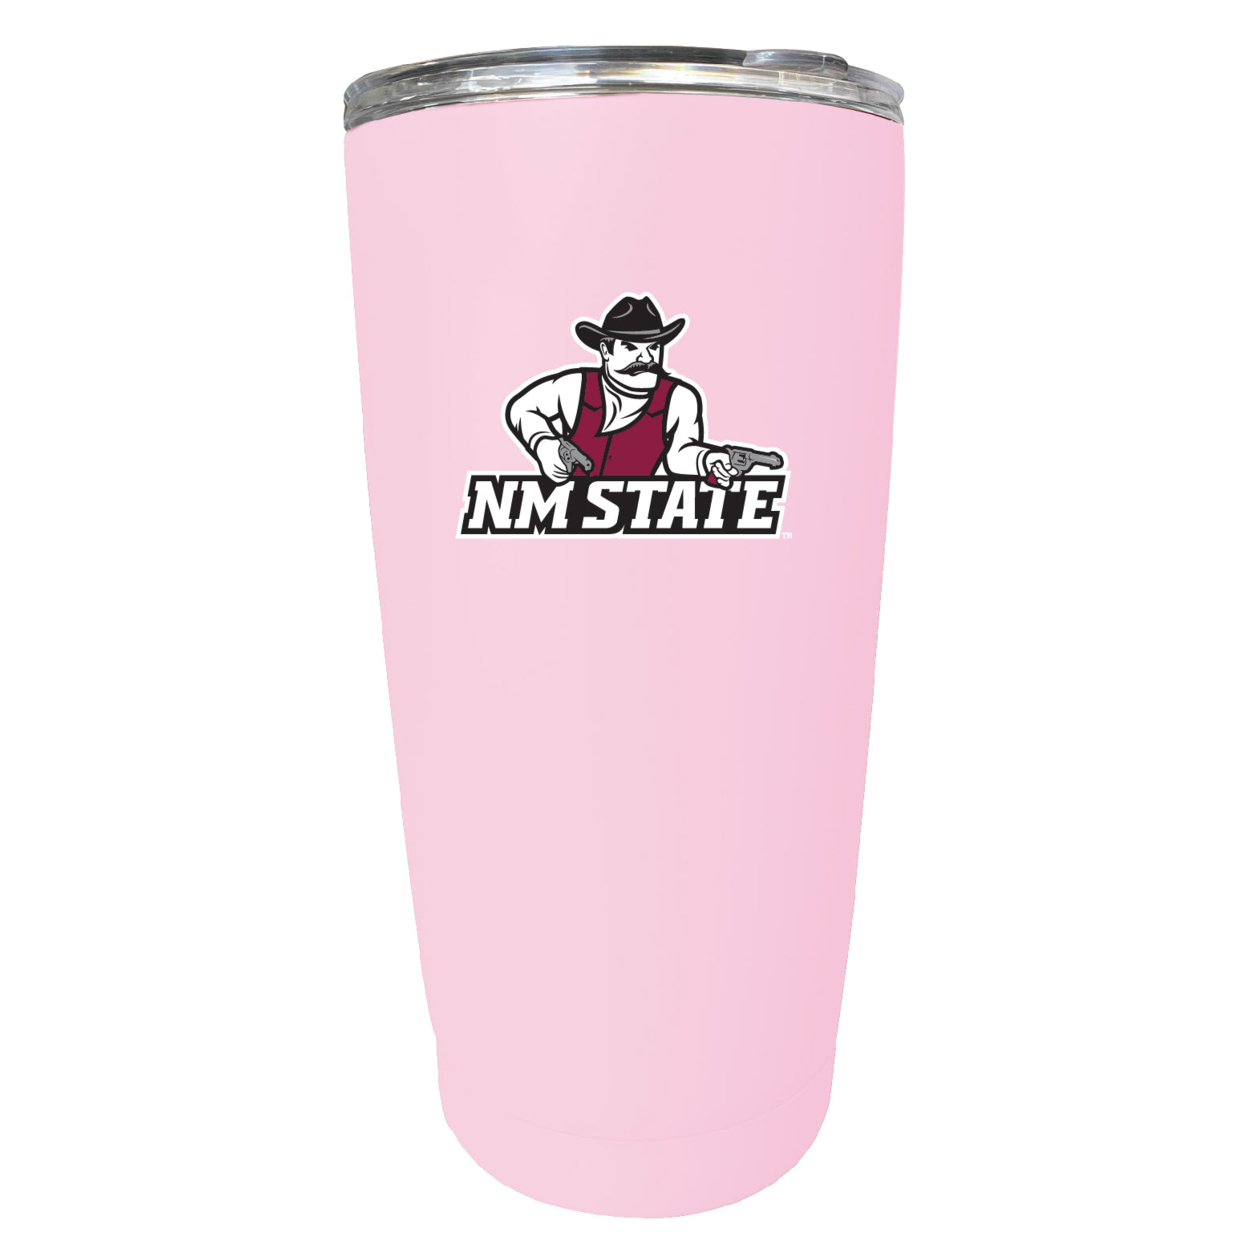 New Mexico State University Aggies 16 Oz Stainless Steel Insulated Tumbler - Pink